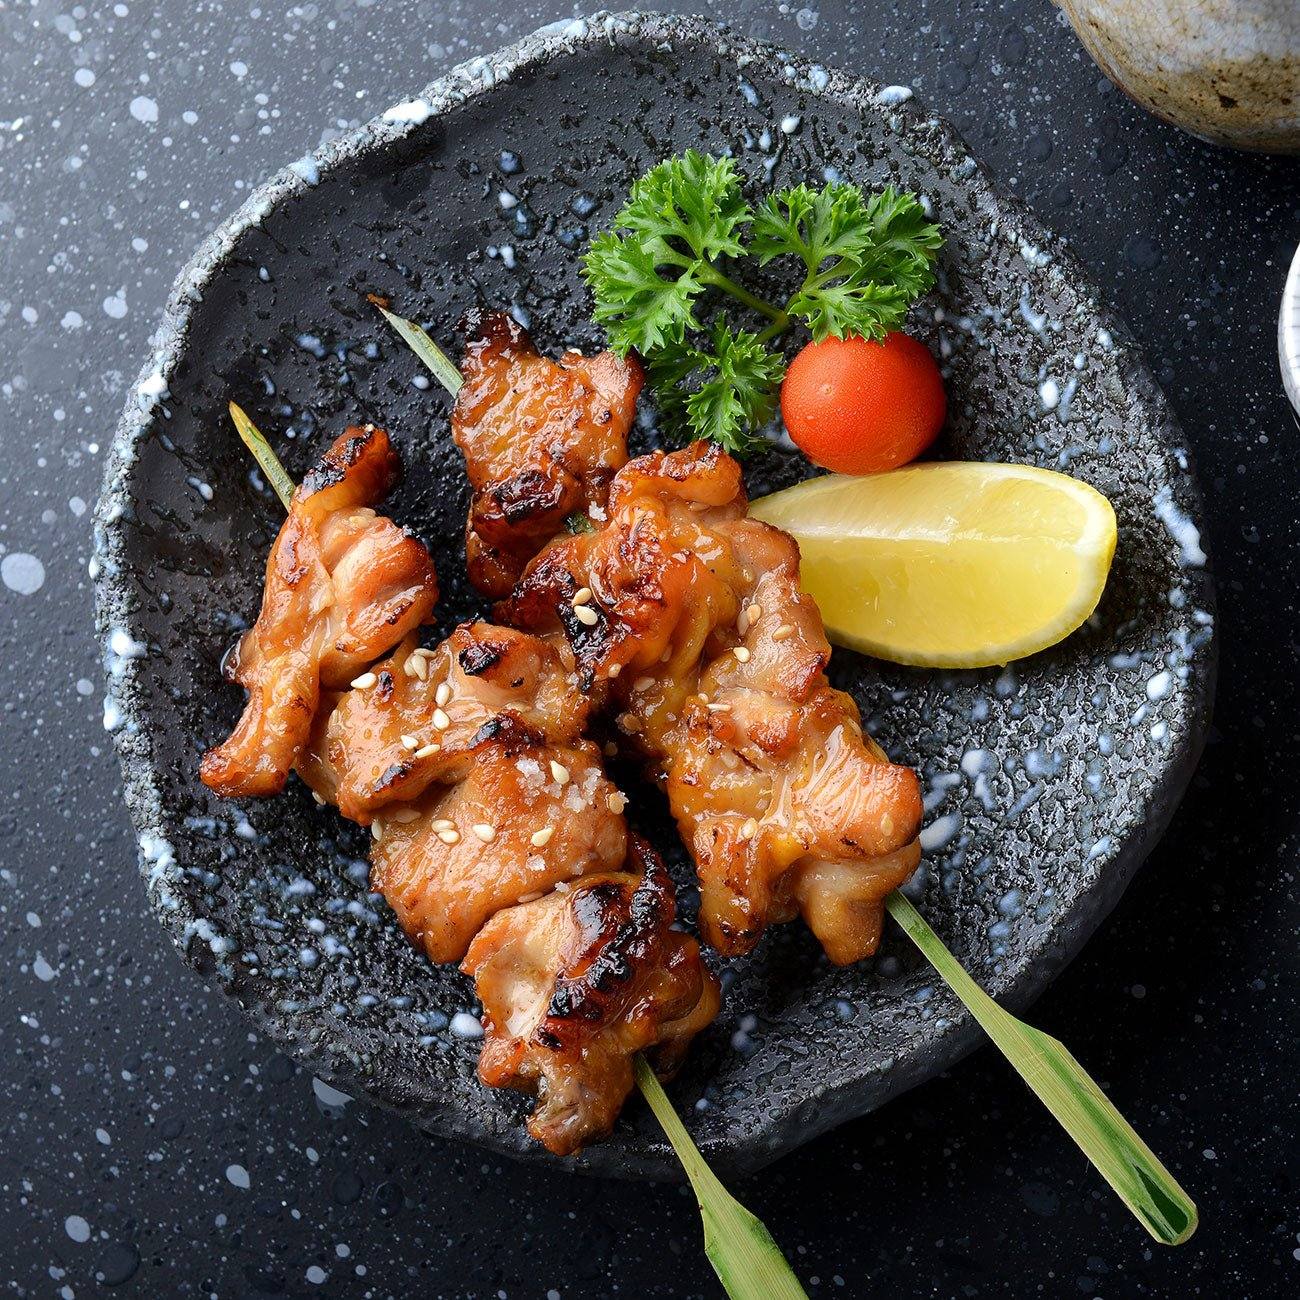 Create a Delicious Japanese-Style Chicken Dish at Home! - One Stop Chilli Shop